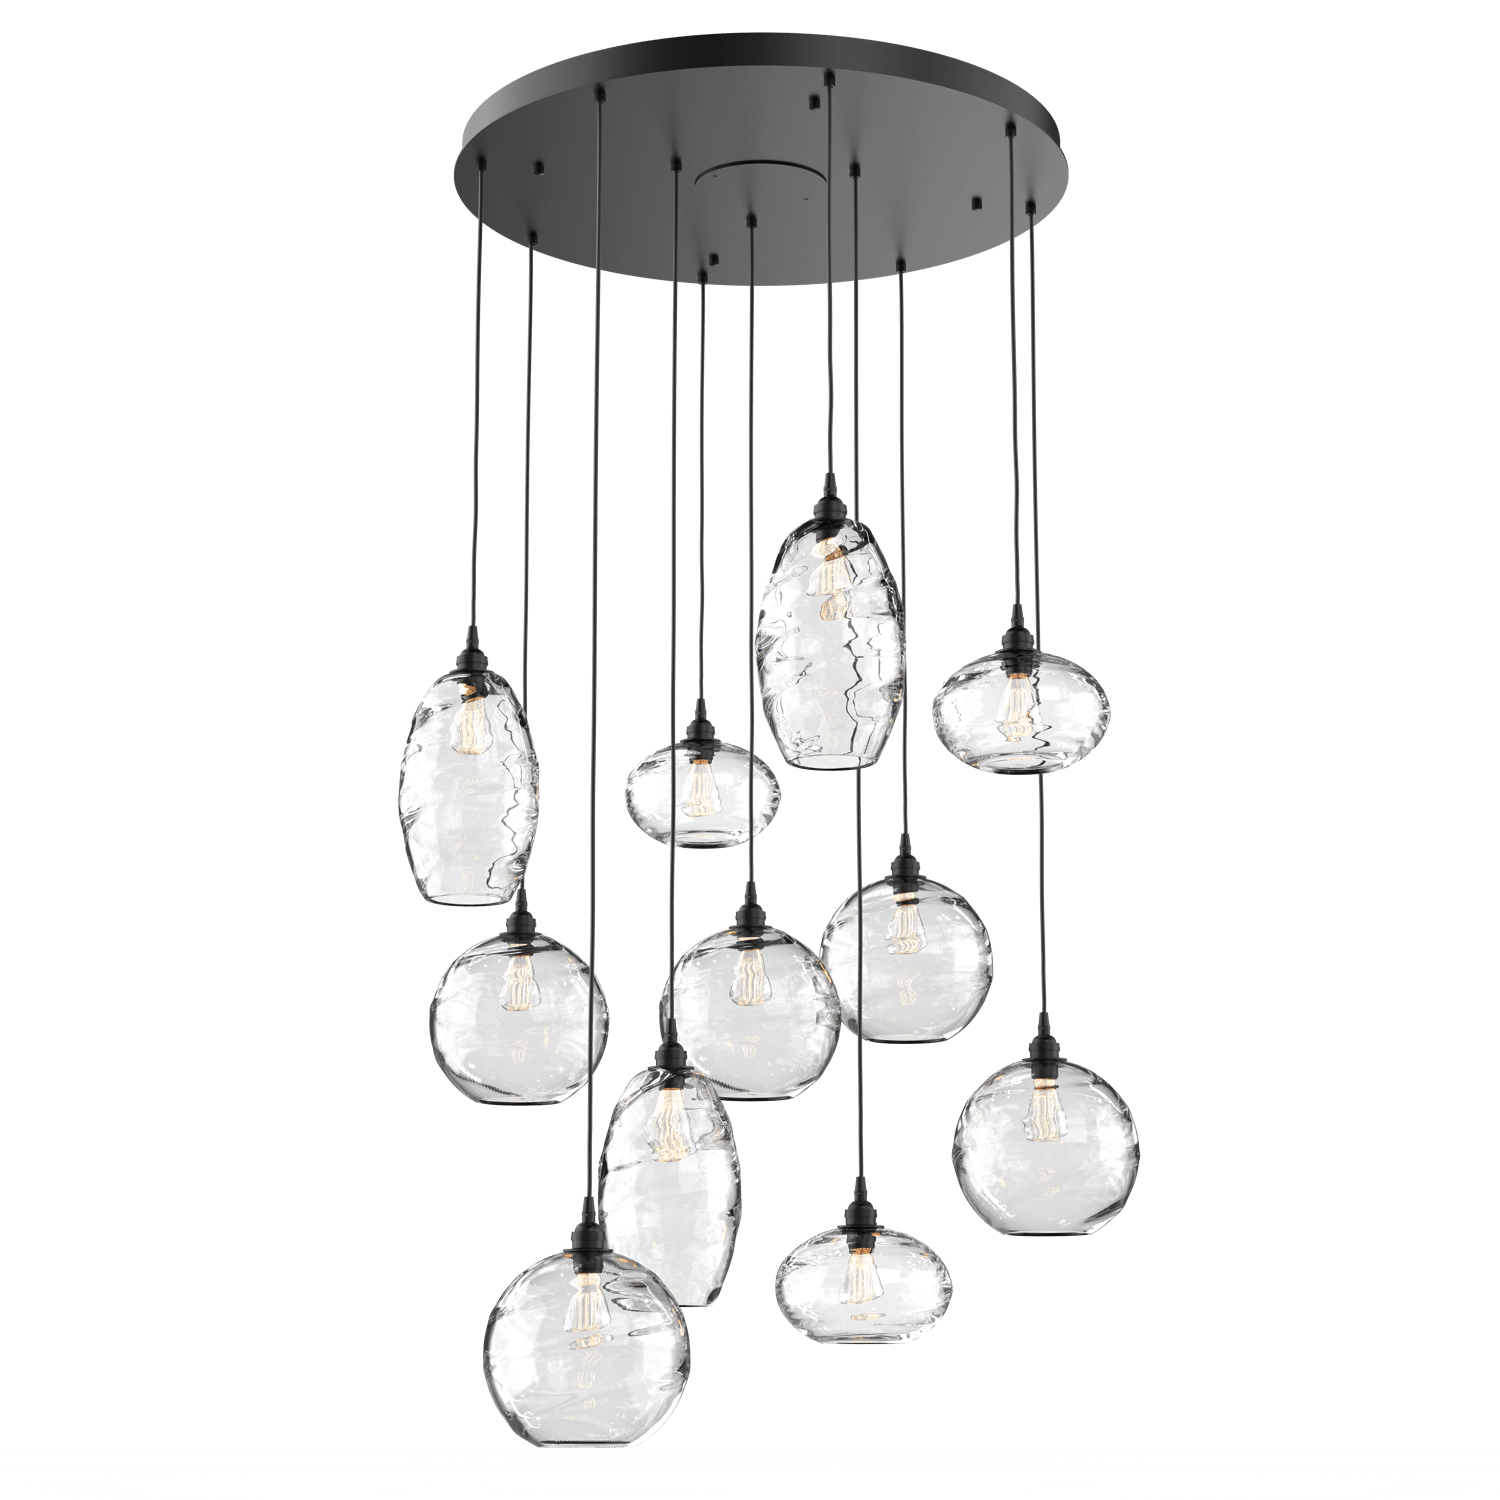 CHB0048-11-MB-OC-Hammerton-Studio-Optic-Blown-Glass-Misto-11-light-round-pendant-chandelier-with-matte-black-finish-and-optic-clear-blown-glass-shades-and-incandescent-lamping